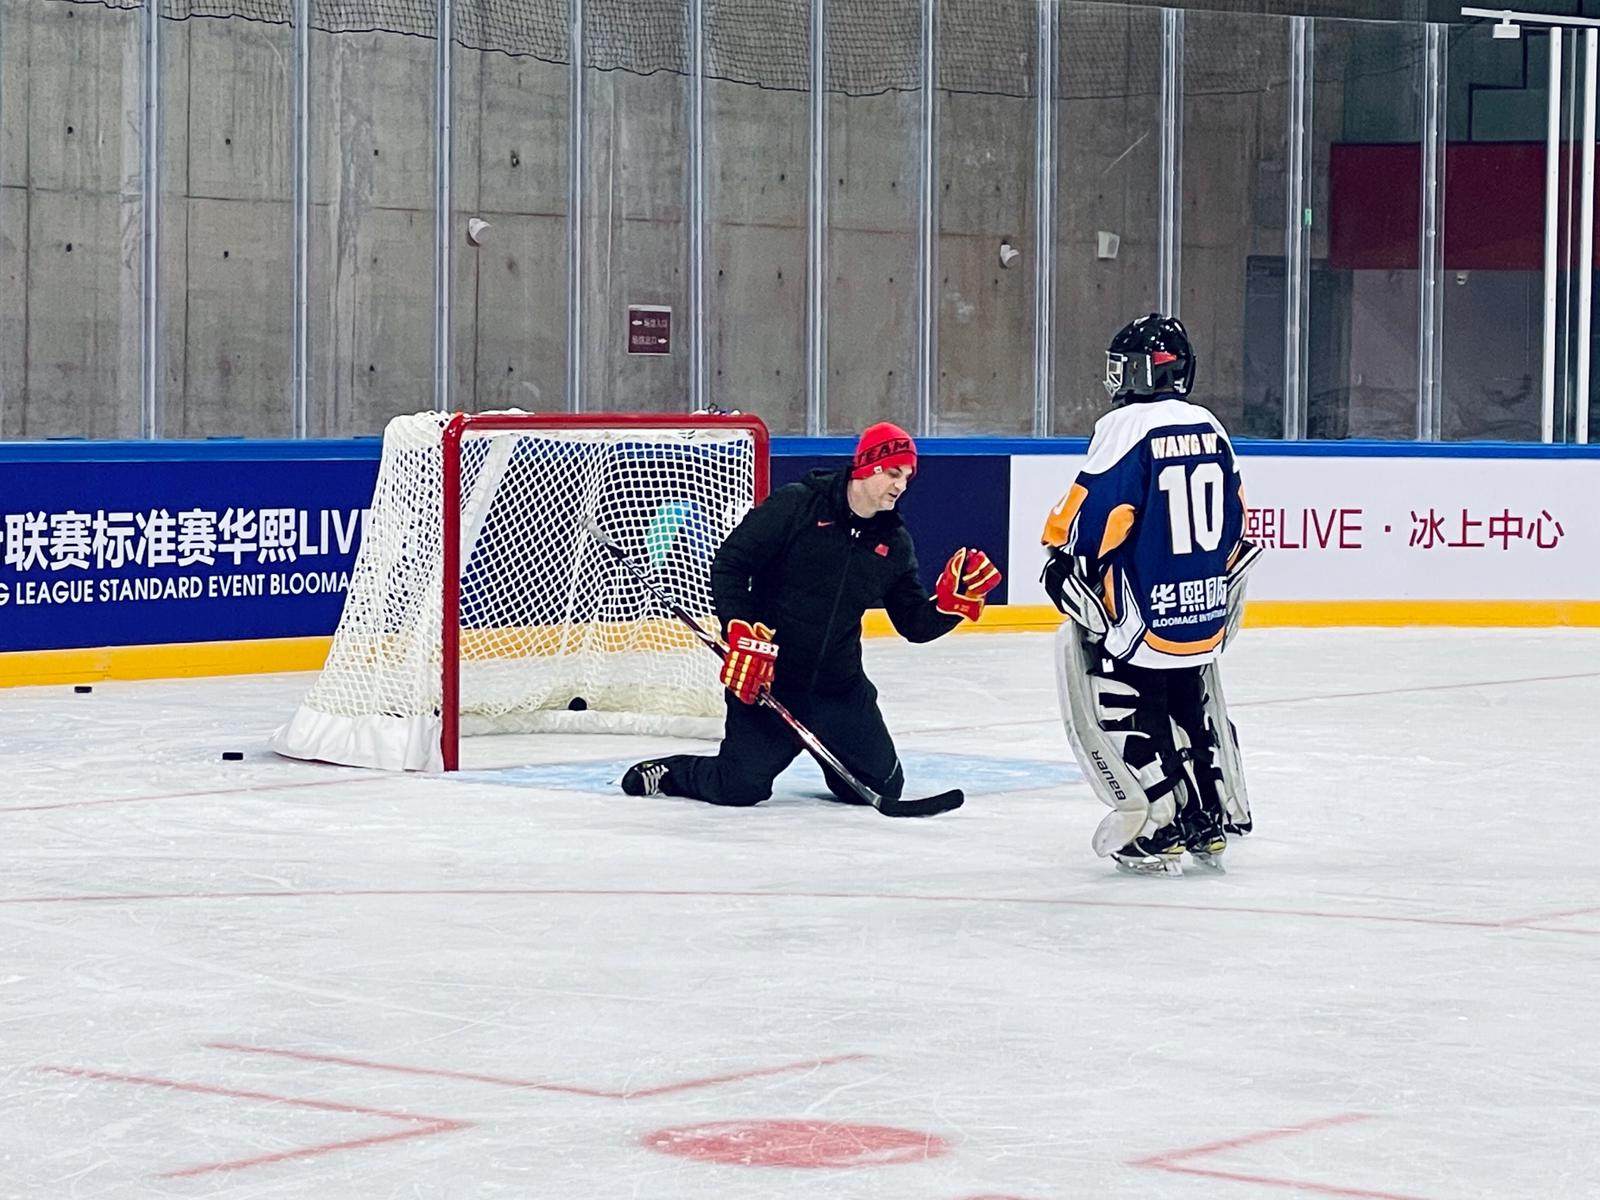 Clint Hazen is known as ‘“the hockey guy” at the rink where he works in Beijing. Photo: Galaxy Winter Club